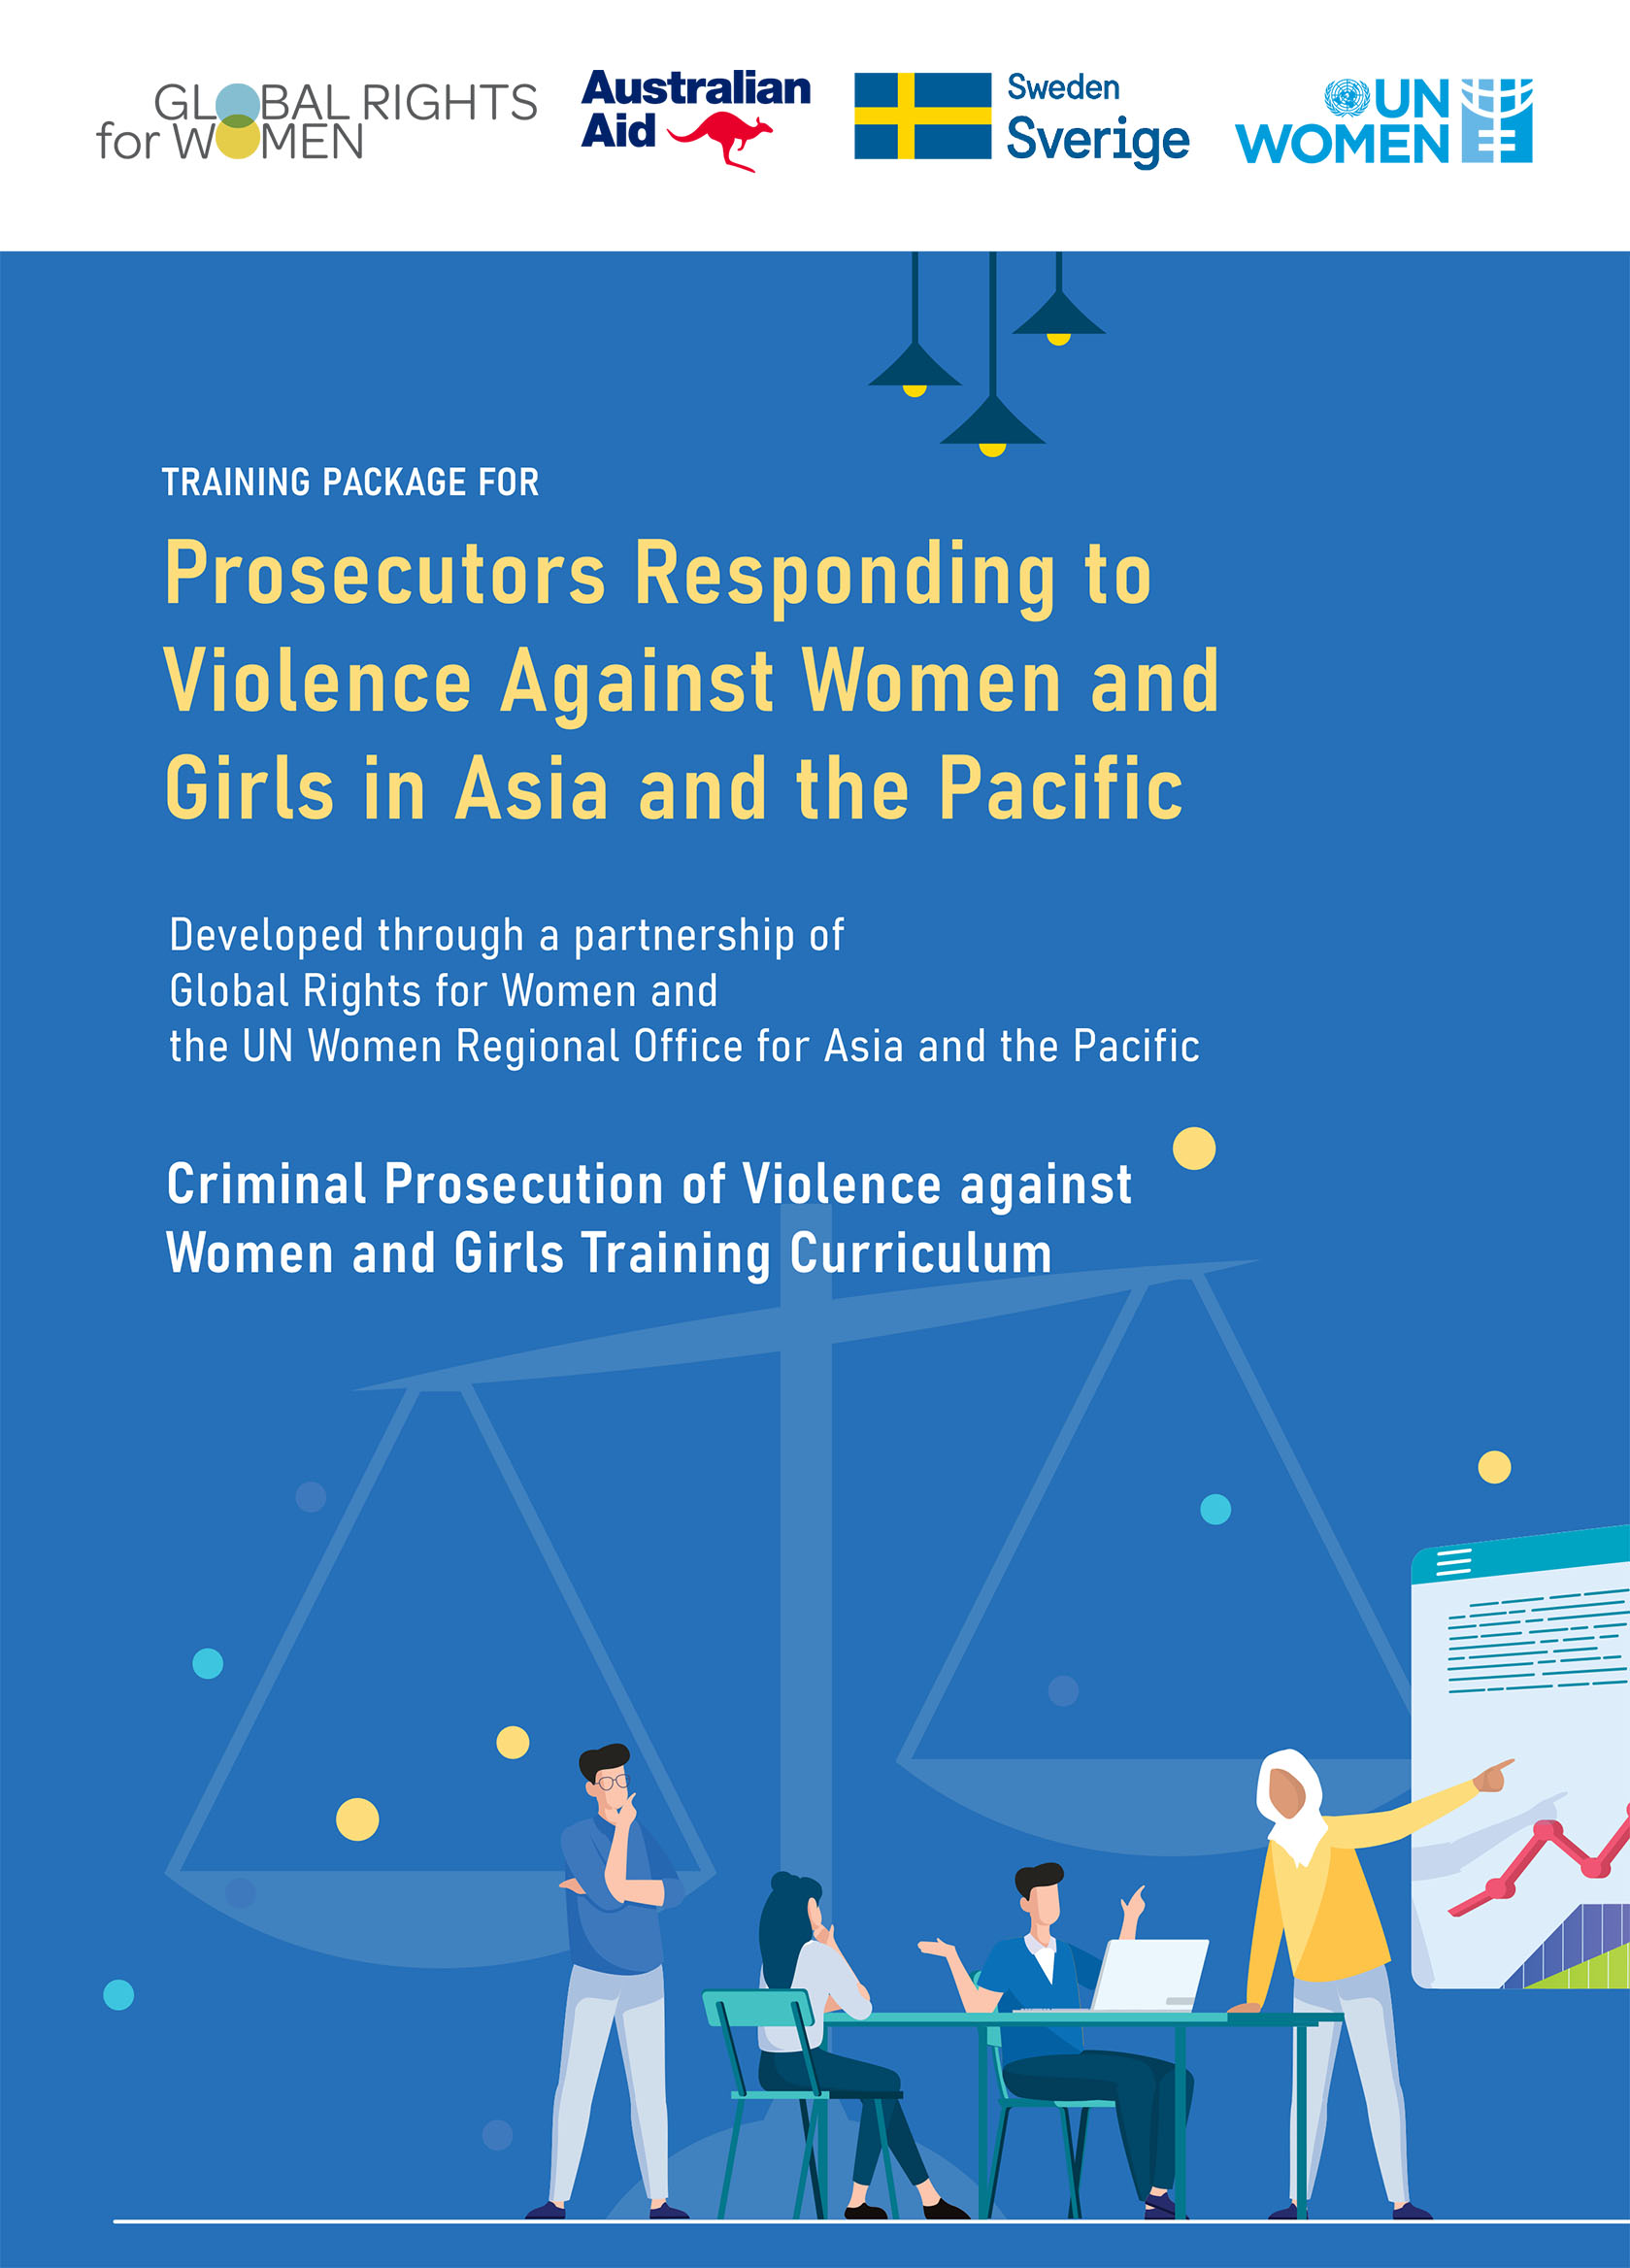 TRAINING PACKAGE FOR Prosecutors Responding to Violence Against Women and Girls in Asia and the Pacific